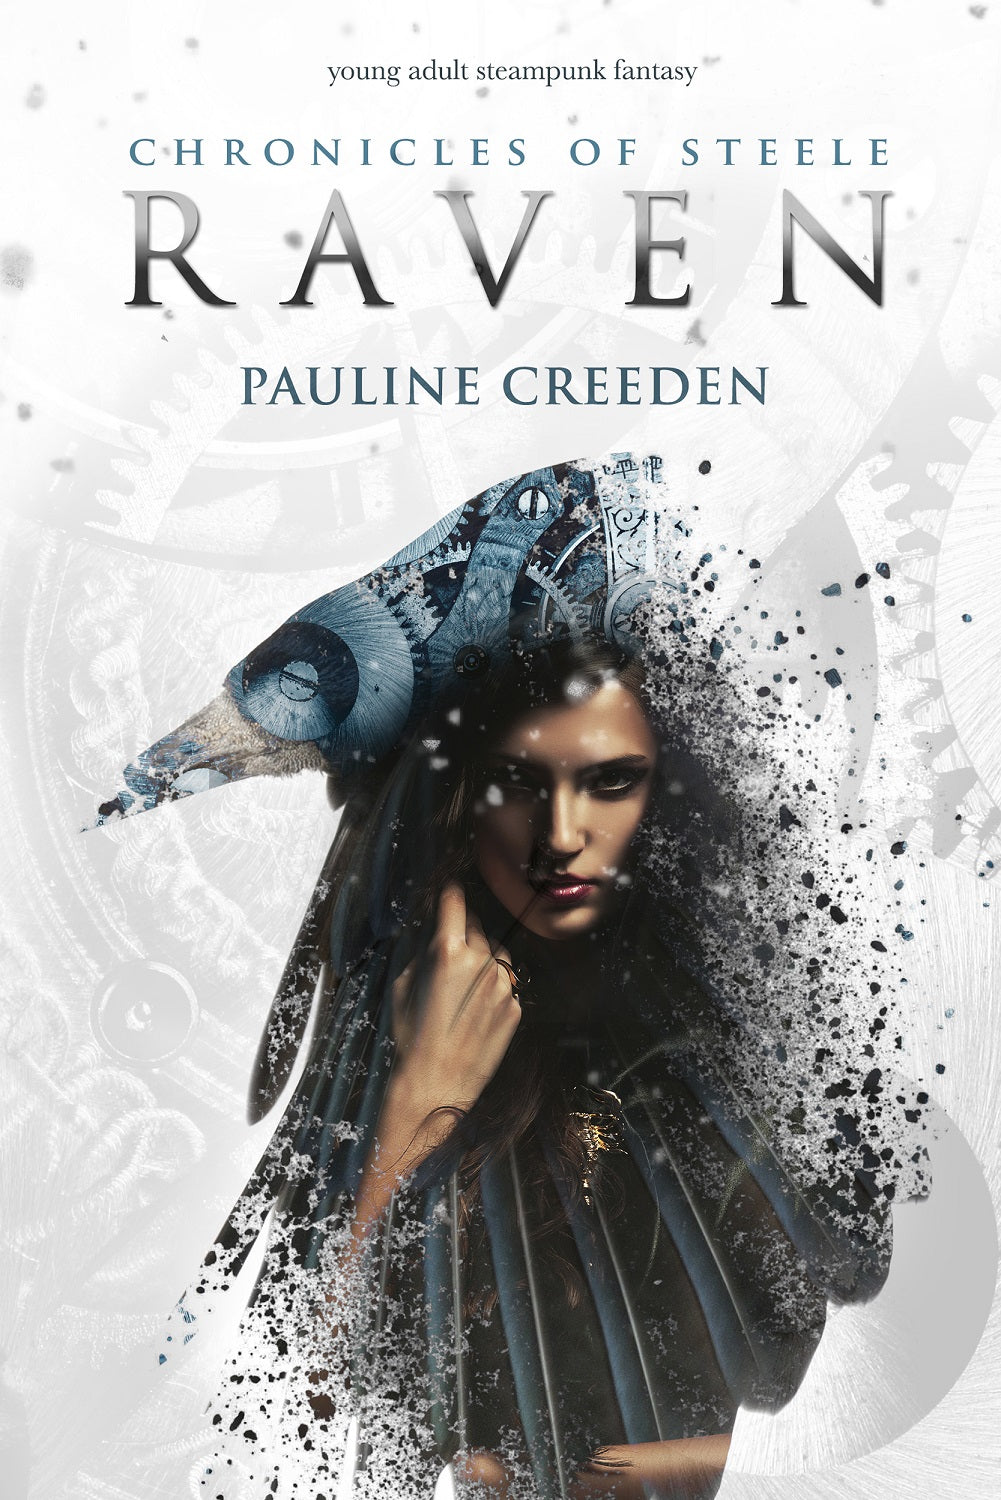 Book Review: Chronicles of Steele Raven by Pauline Creeden